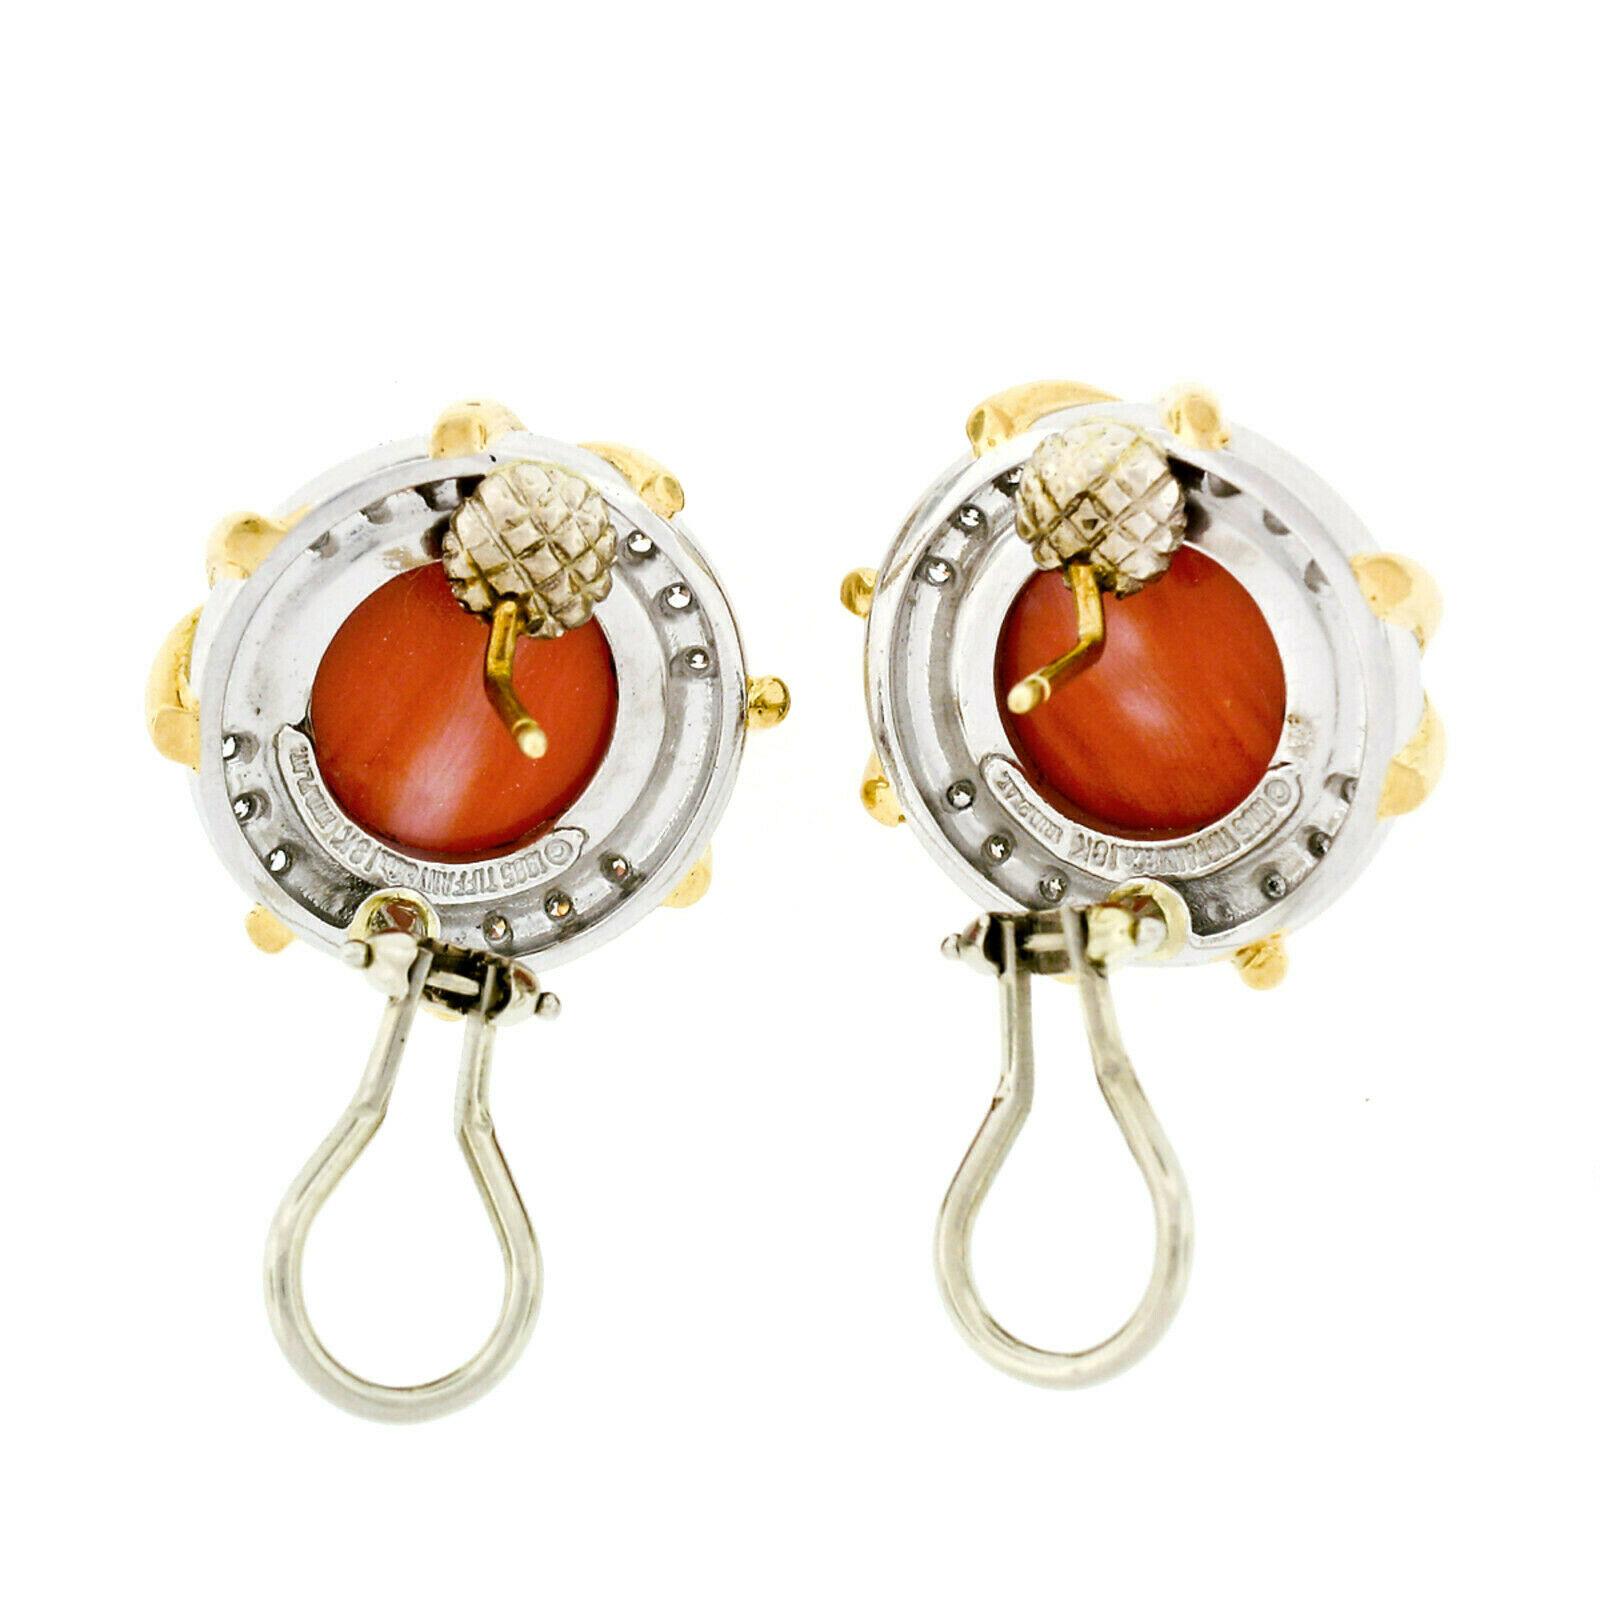 Tiffany & Co. 1985 18k Gold & Platinum GIA Round Coral & Diamond Button Earrings For Sale 1